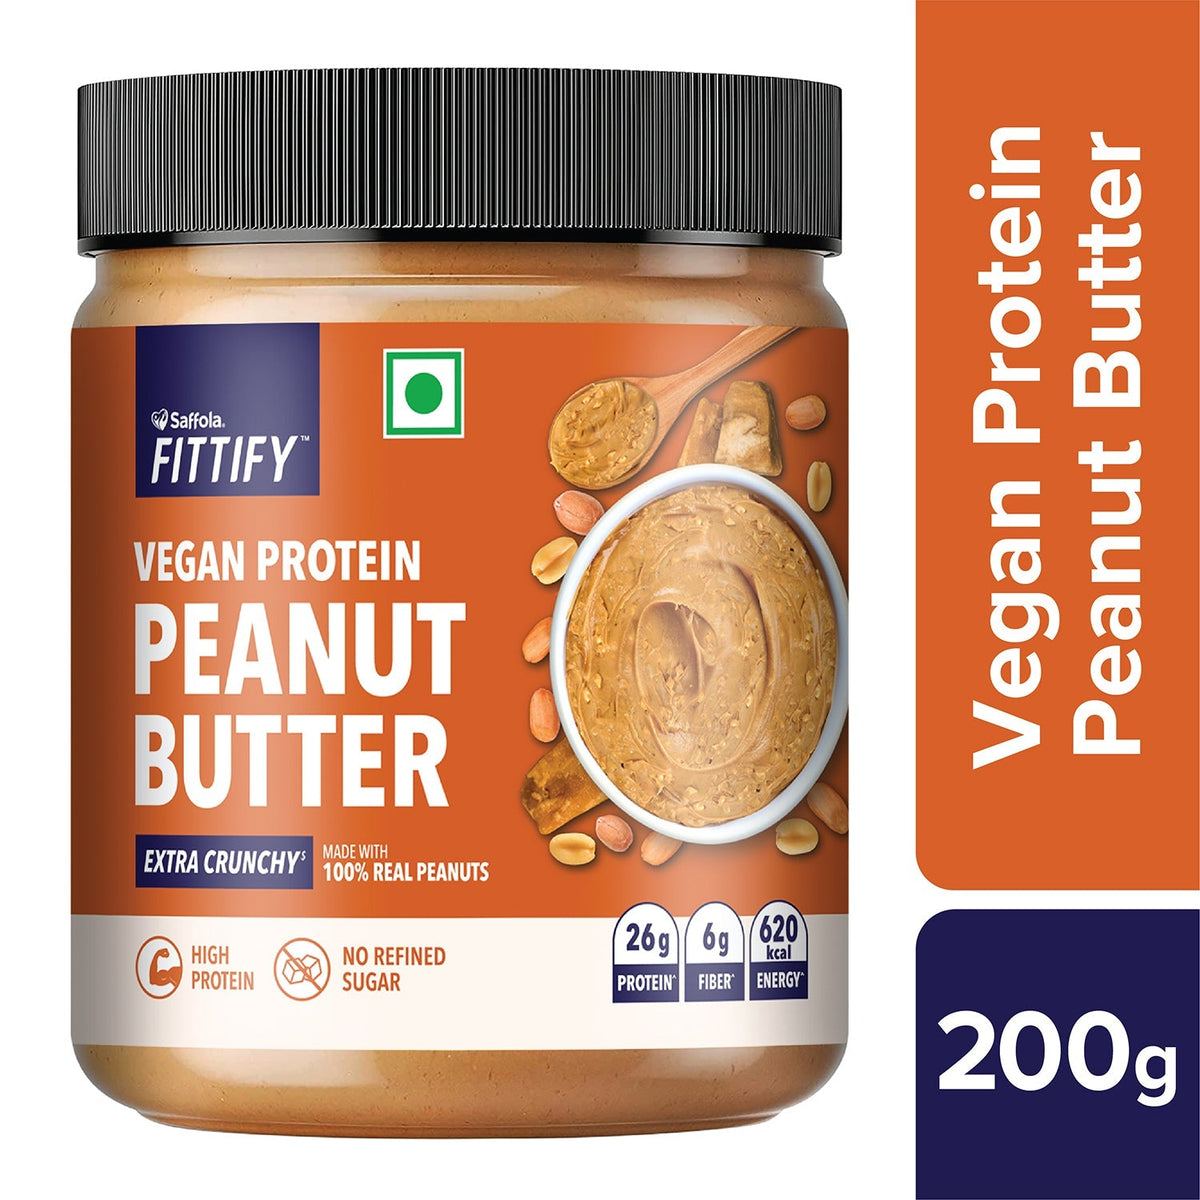 [CRED] Saffola Fittify Vegan Protein - Peanut Butter